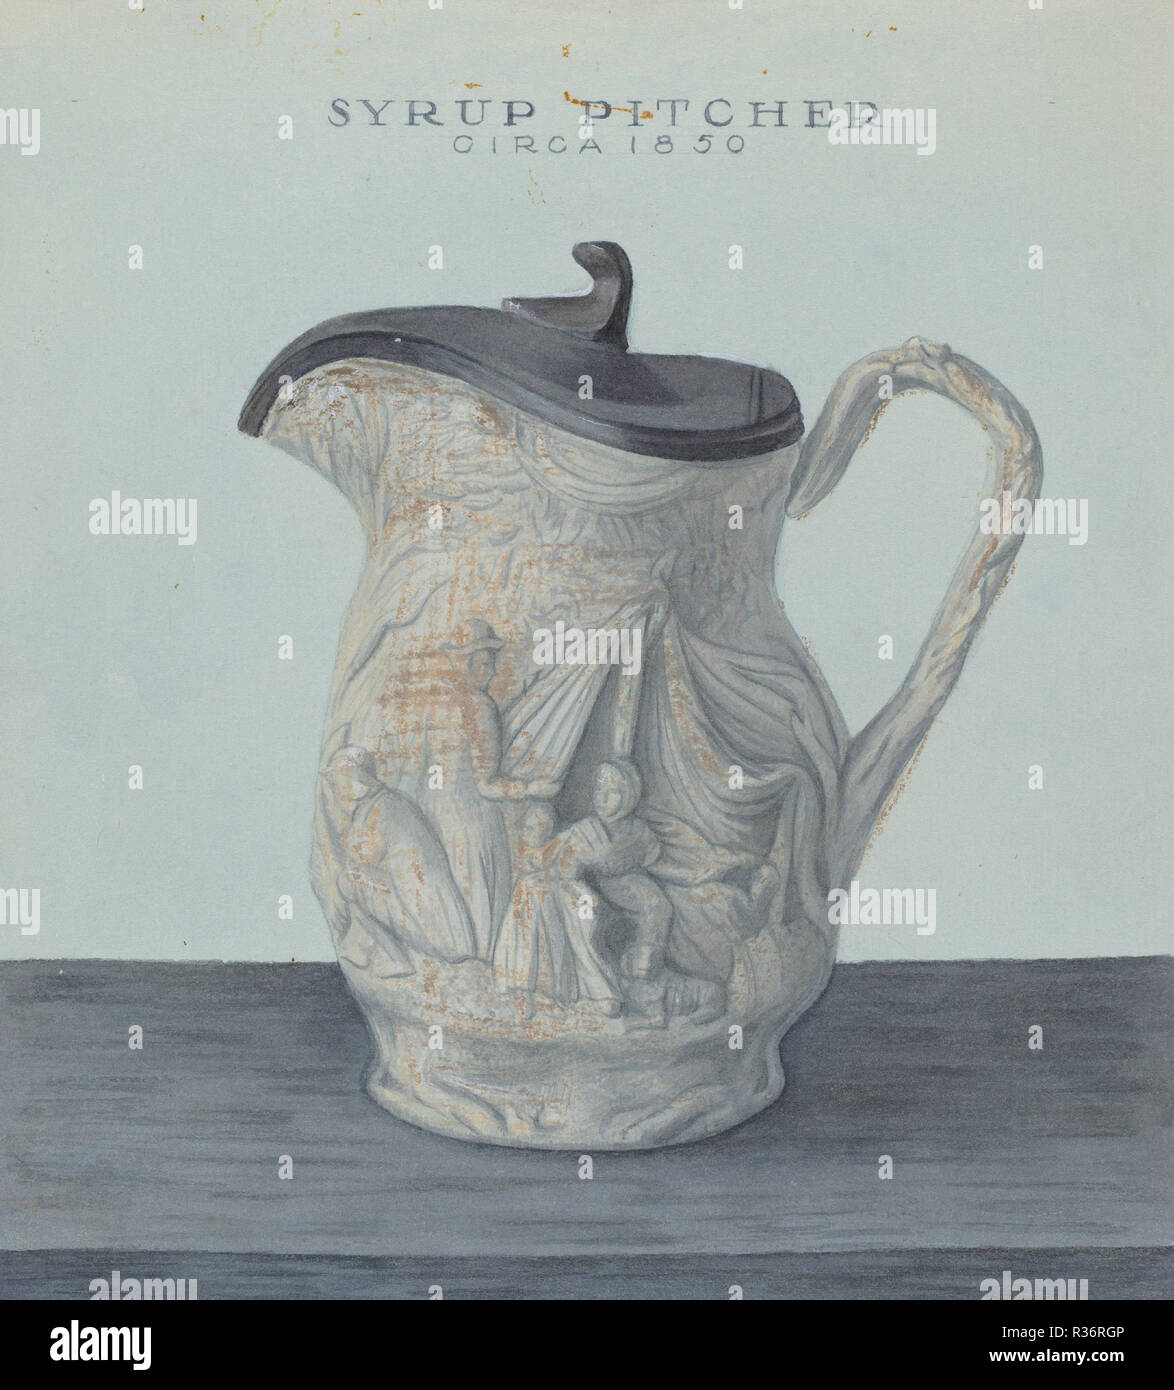 Syrup Pitcher. Dated: c. 1938. Dimensions: overall: 25.9 x 23 cm (10 3/16 x 9 1/16 in.)  Original IAD Object: Pitcher drawn exact size.. Medium: watercolor, graphite, and heightening on paper. Museum: National Gallery of Art, Washington DC. Author: Cleo Lovett. Stock Photo